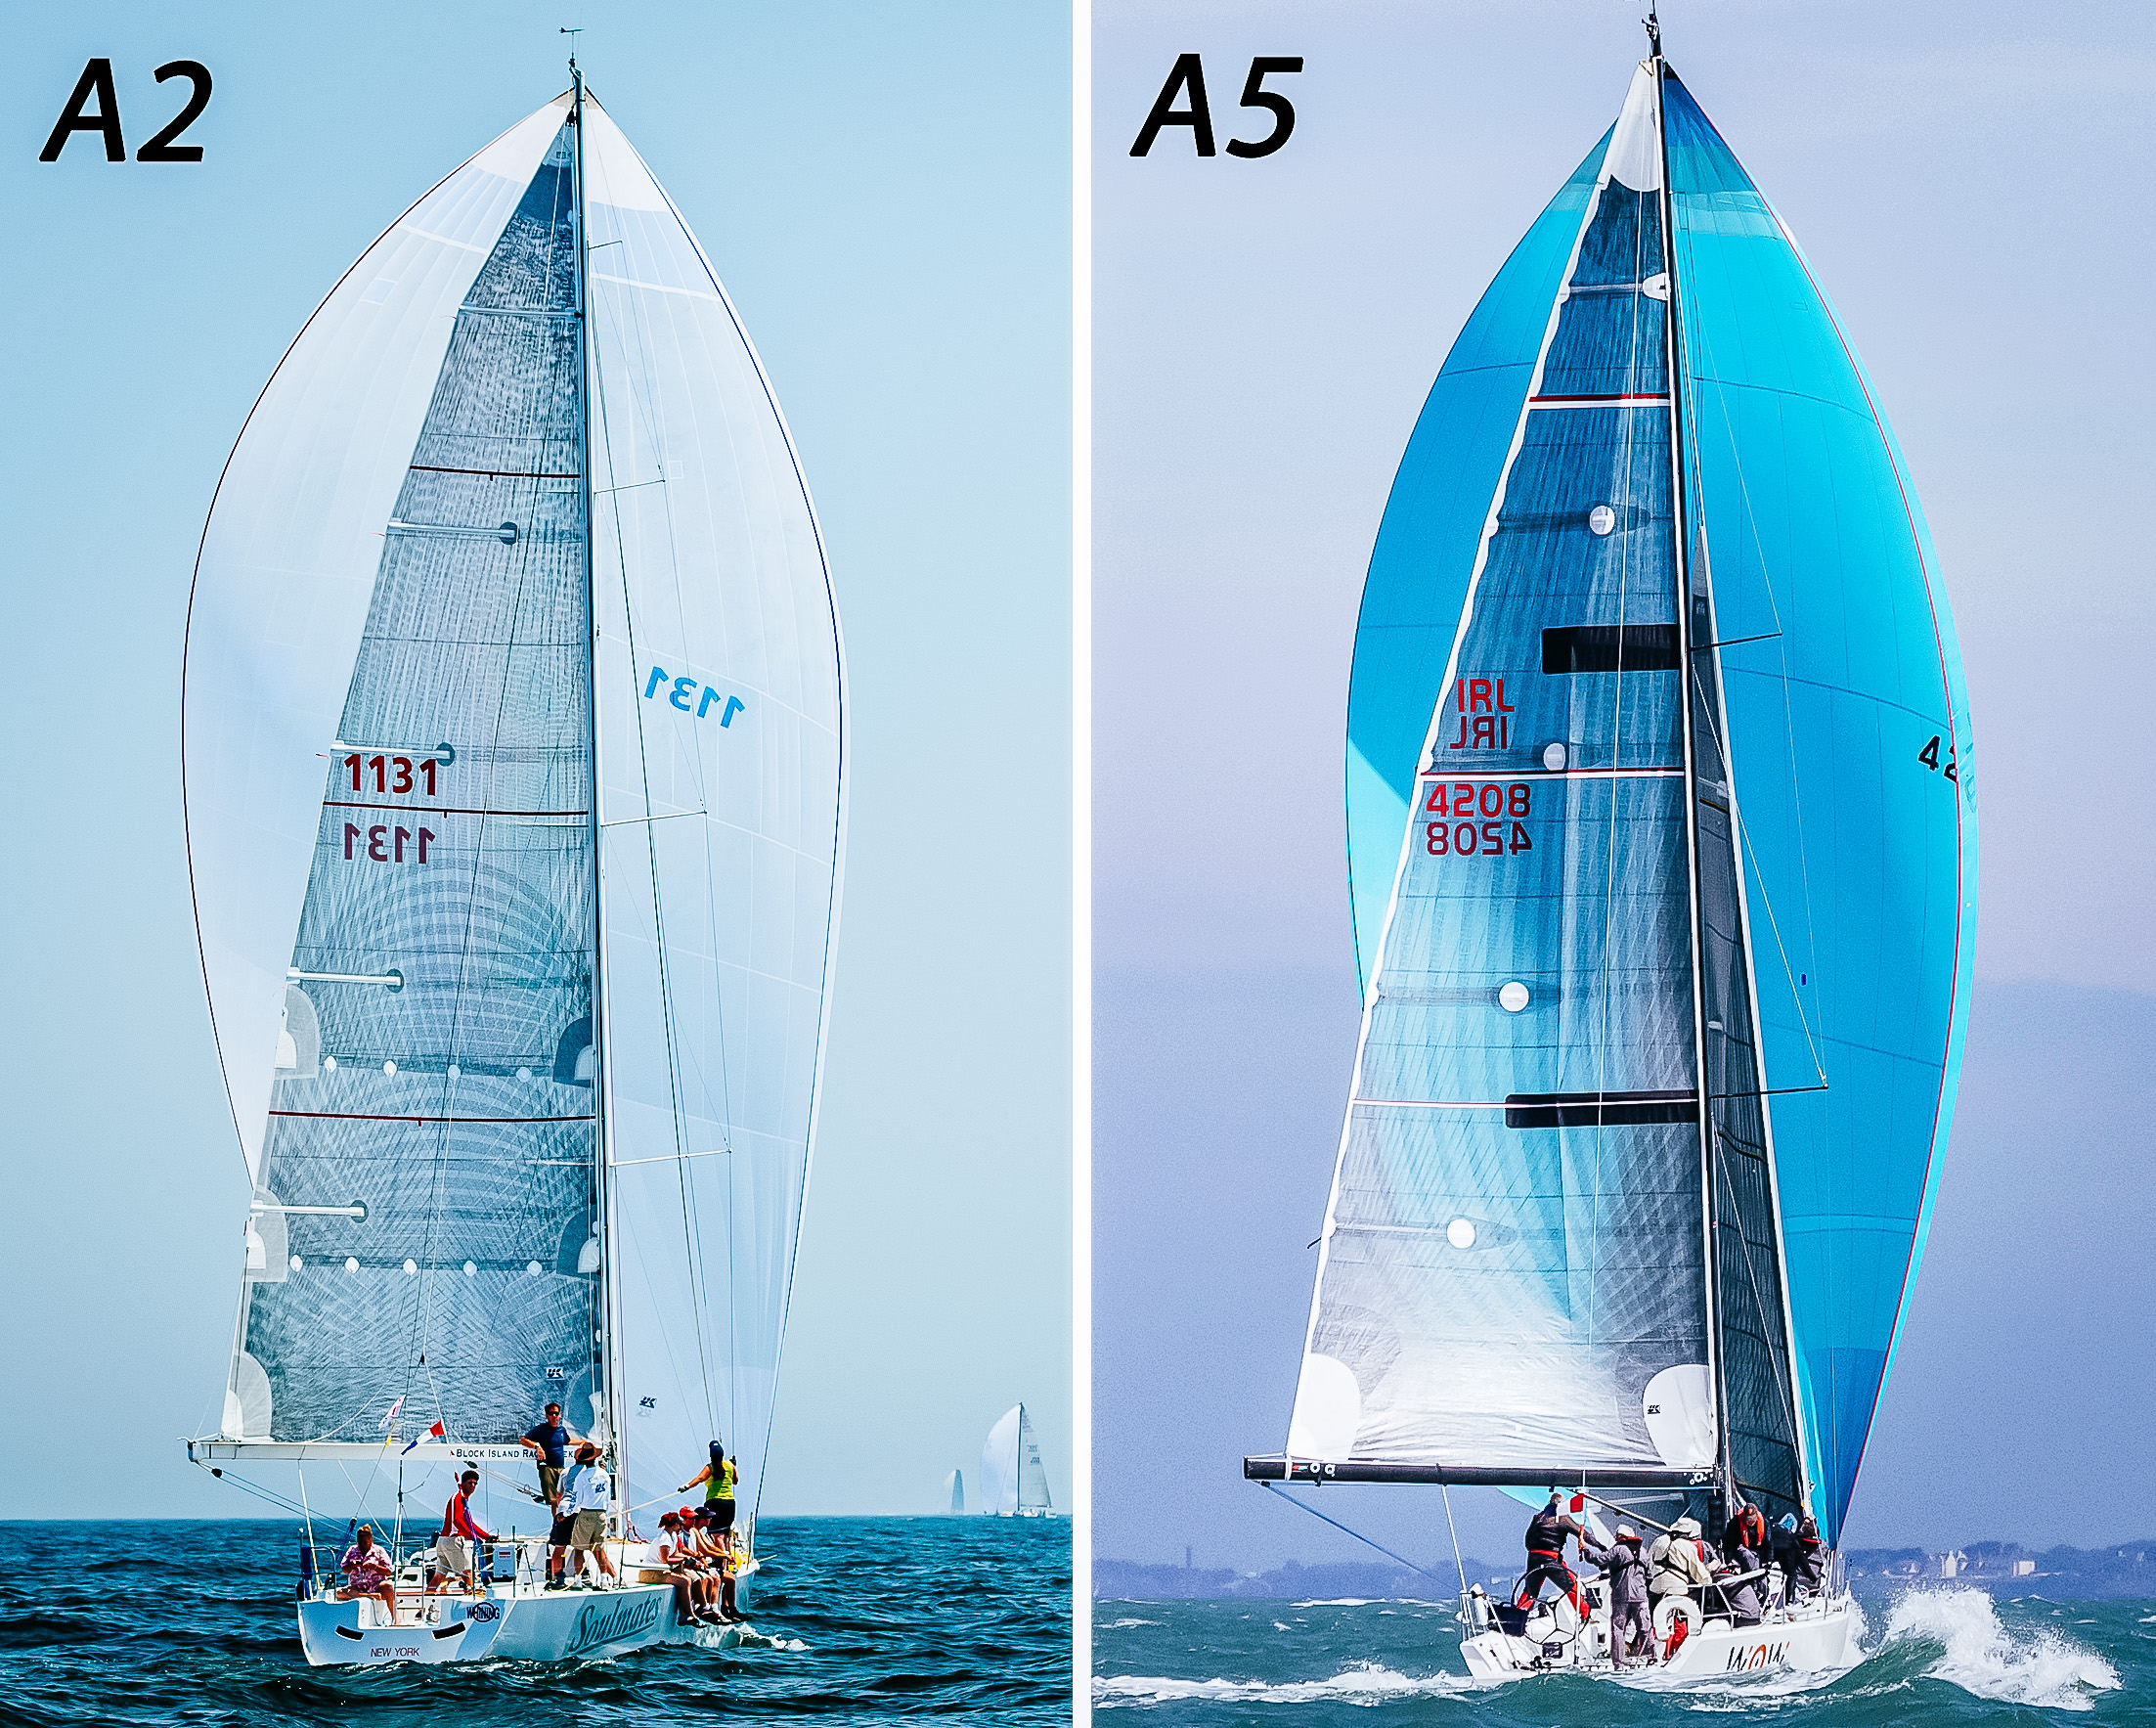 This comparison vividly shows the difference in size and shape between an A2 (full-sized spinnaker) and an A5 (small heavy air asymmetric). The A2 is wider and had full shoulders, while the A5 is much narrower with almost no shoulders.